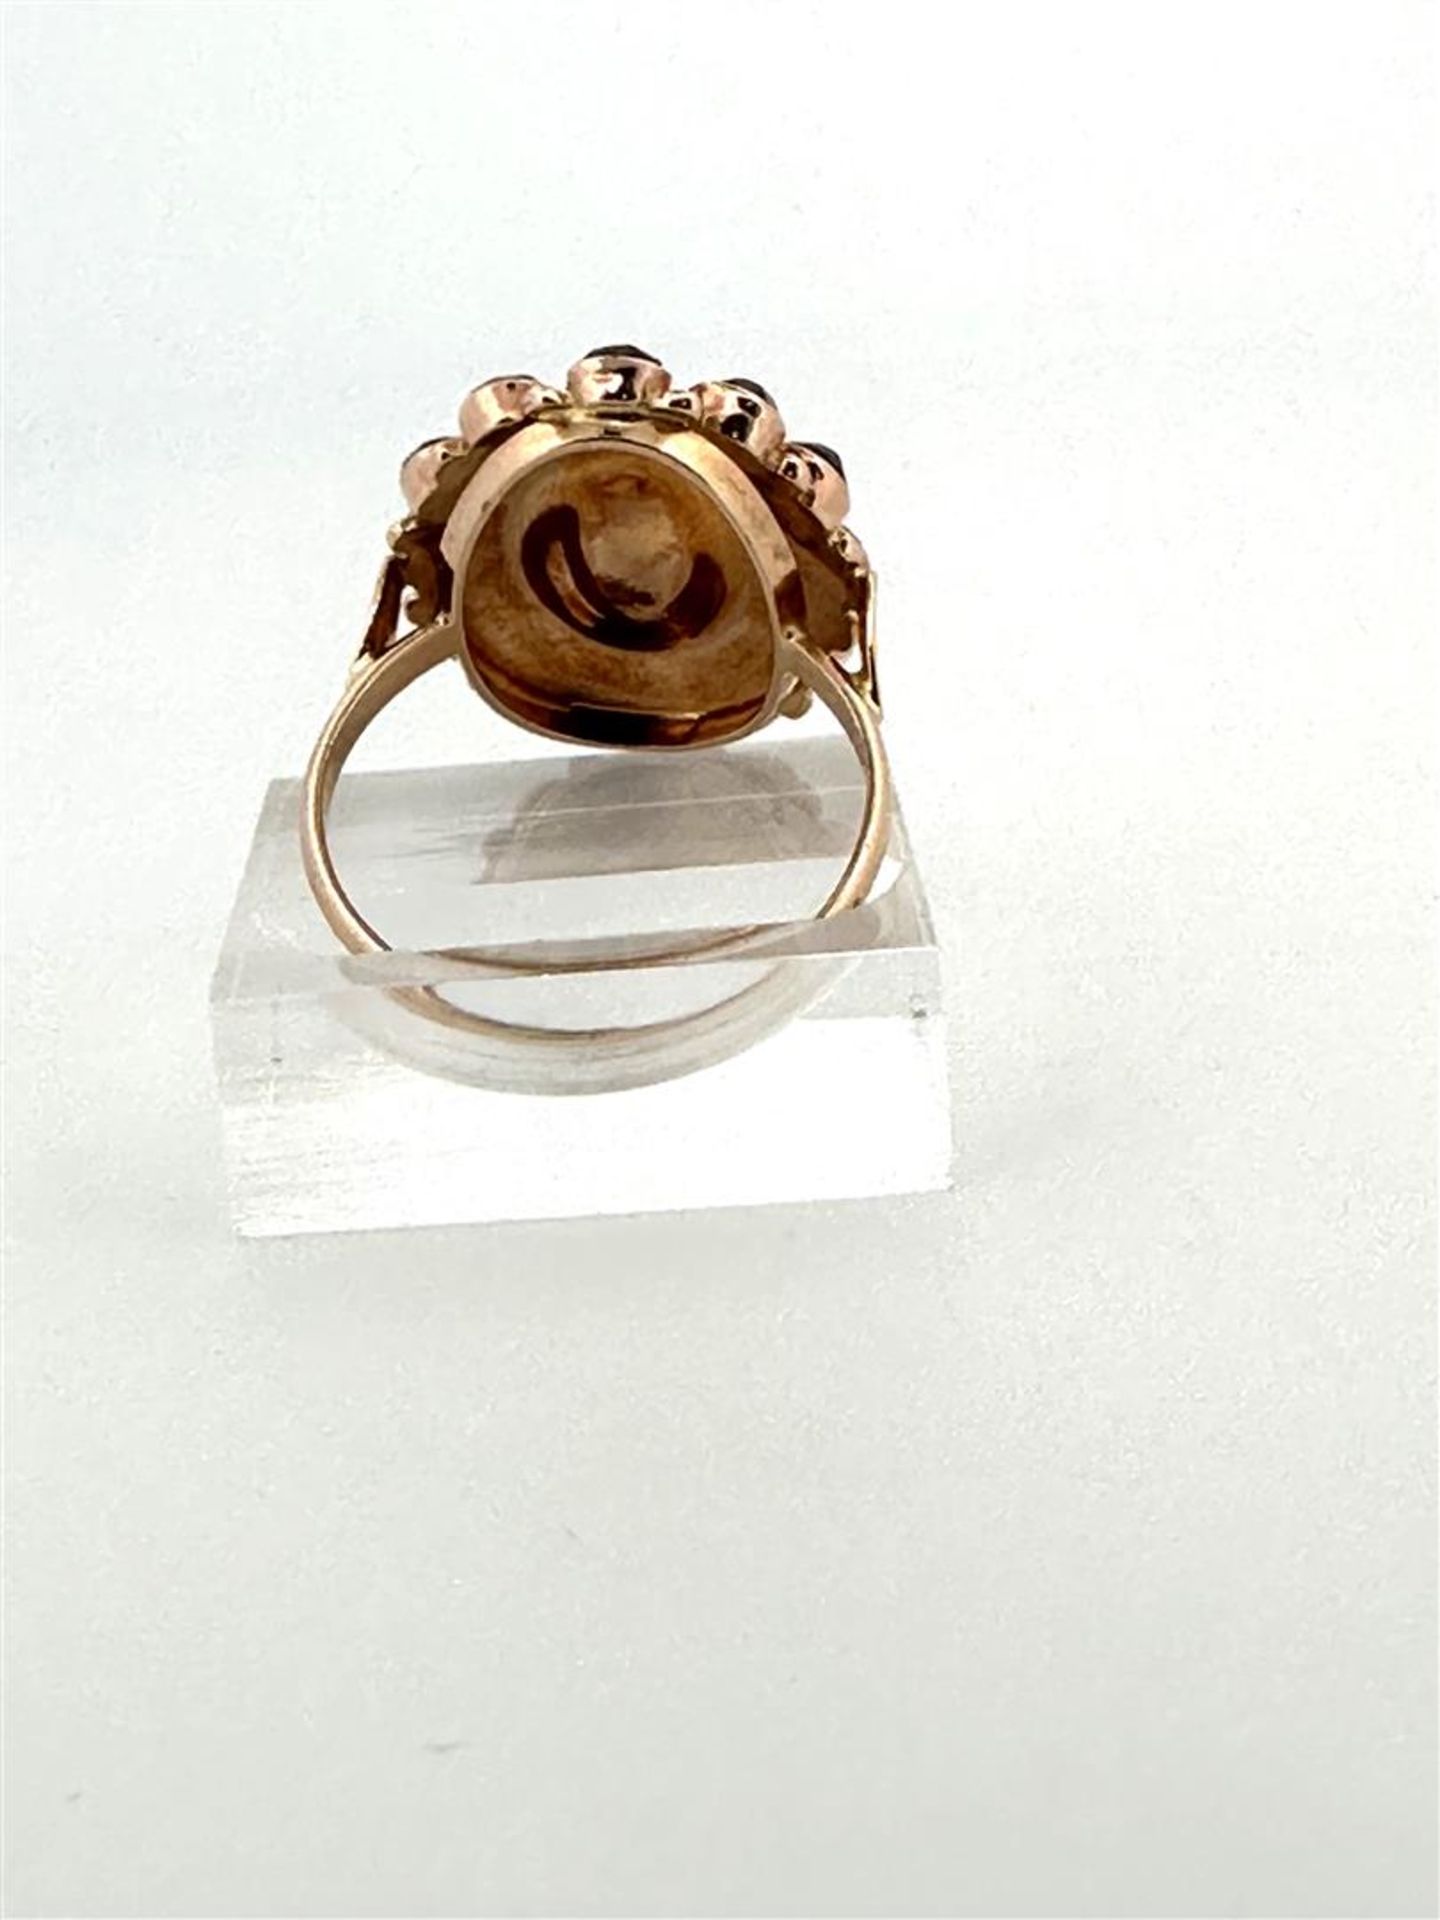 14kt rose gold cocktail ring set with garnet.
The underside of the head is completely closed, so no  - Bild 4 aus 5